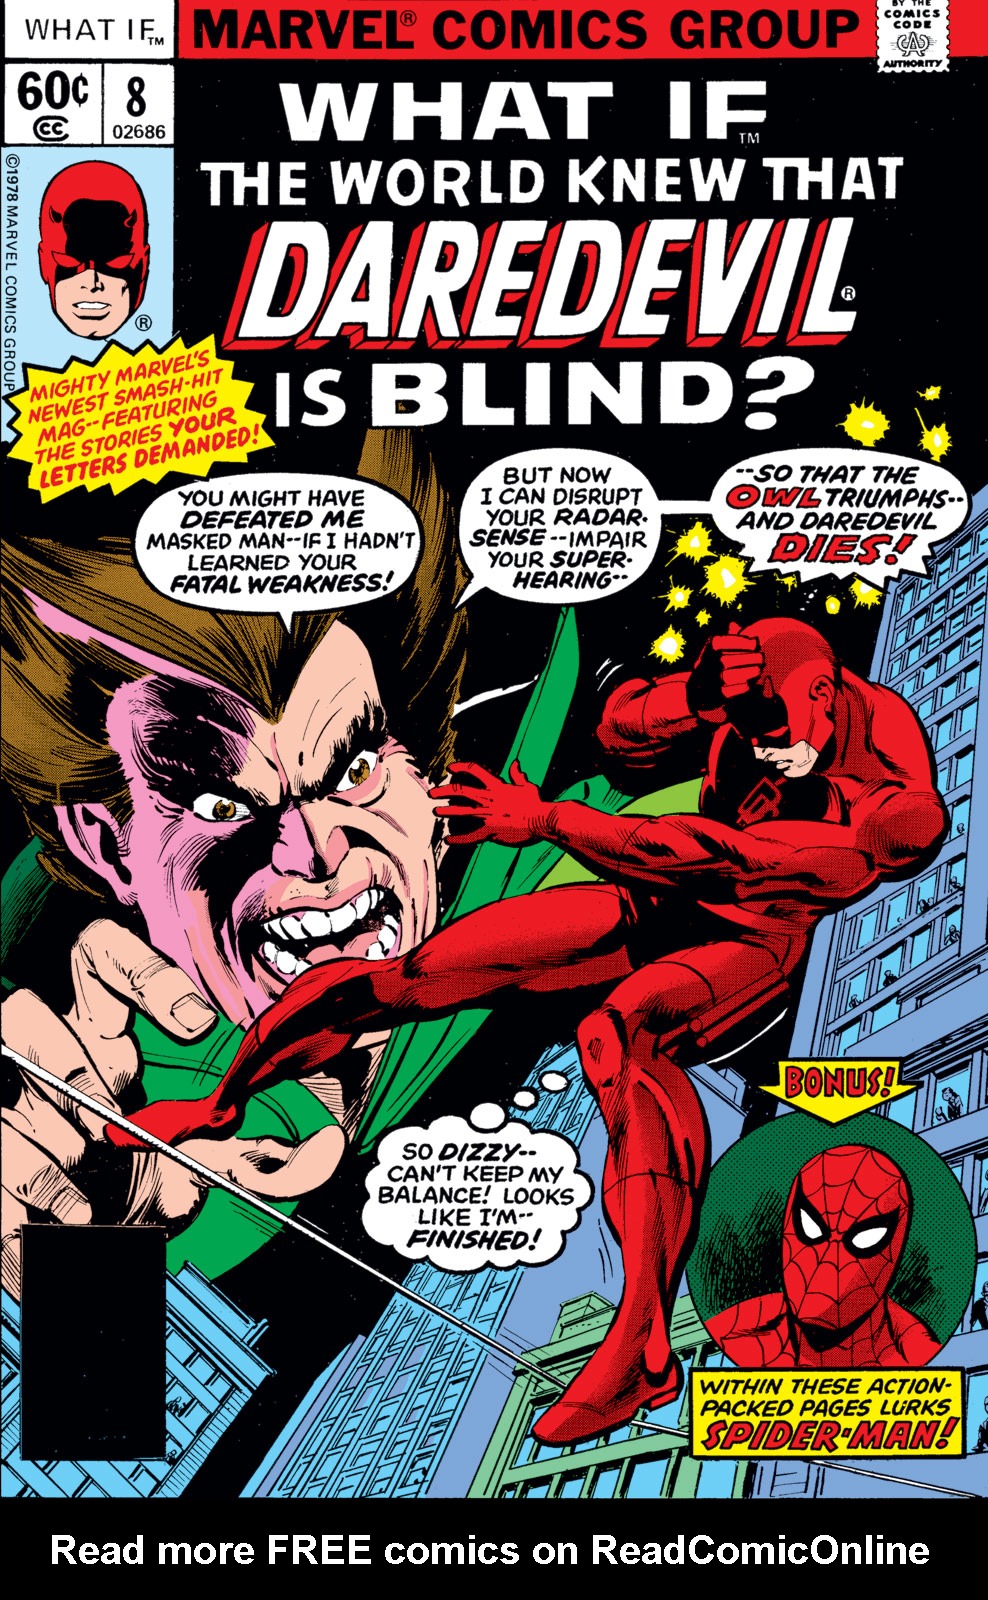 Read online What If? (1977) comic -  Issue #8 - The world knew that Daredevil is blind - 1